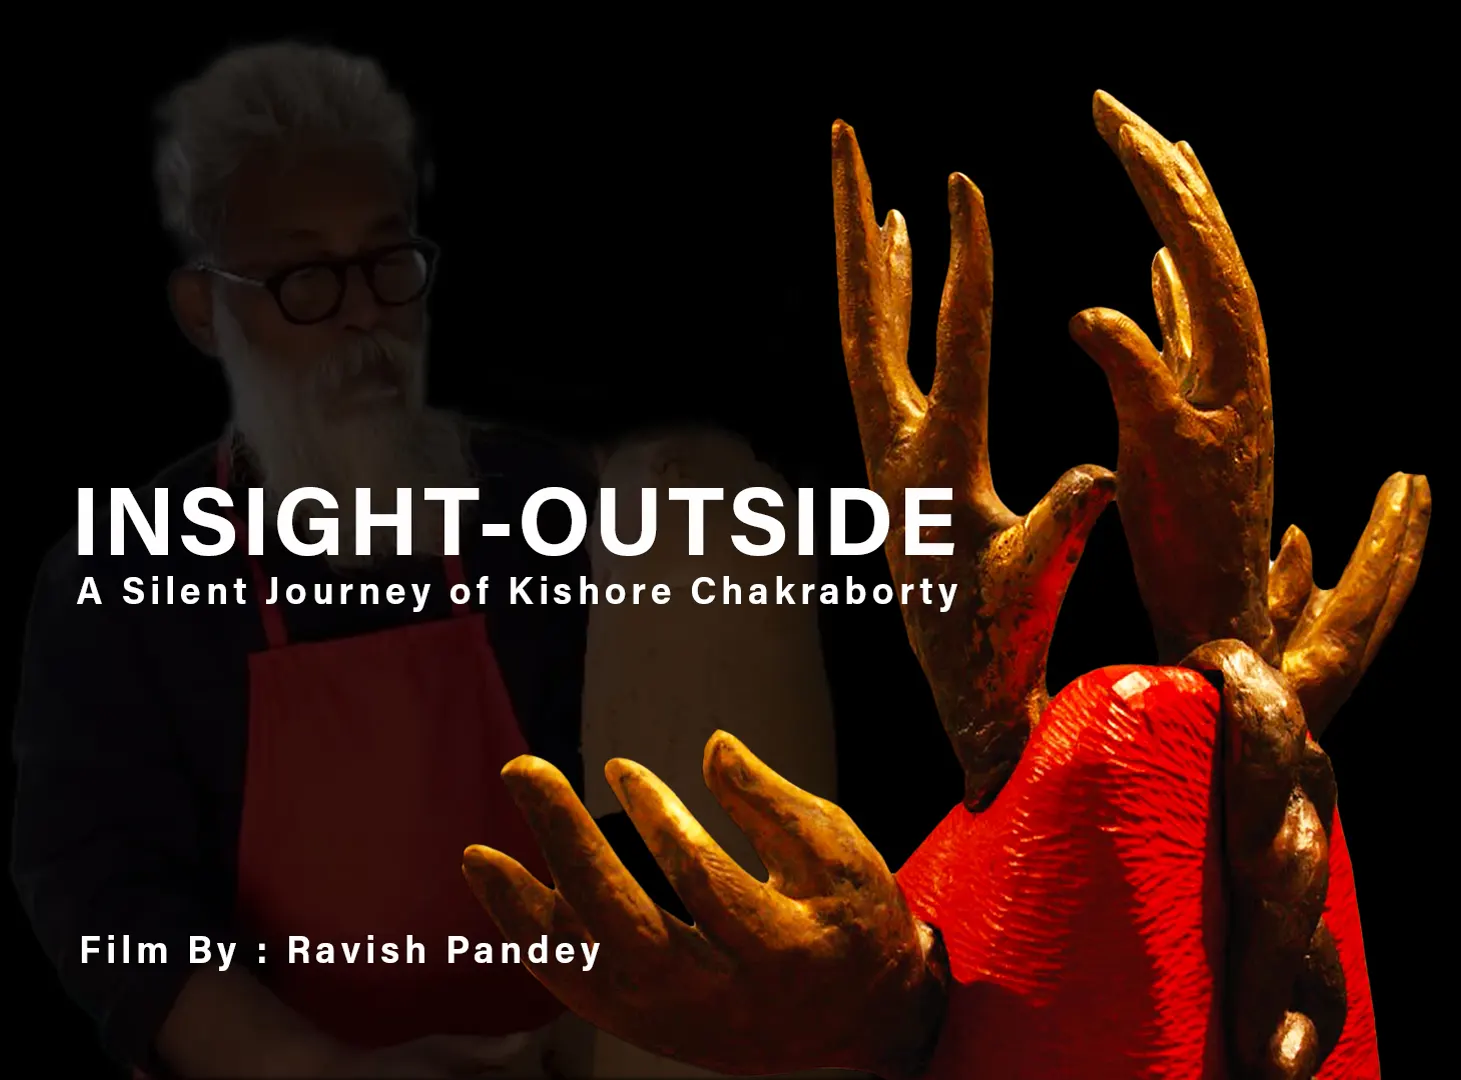 Insight-Outside Documentary by Ravish Pandey Wins Honours